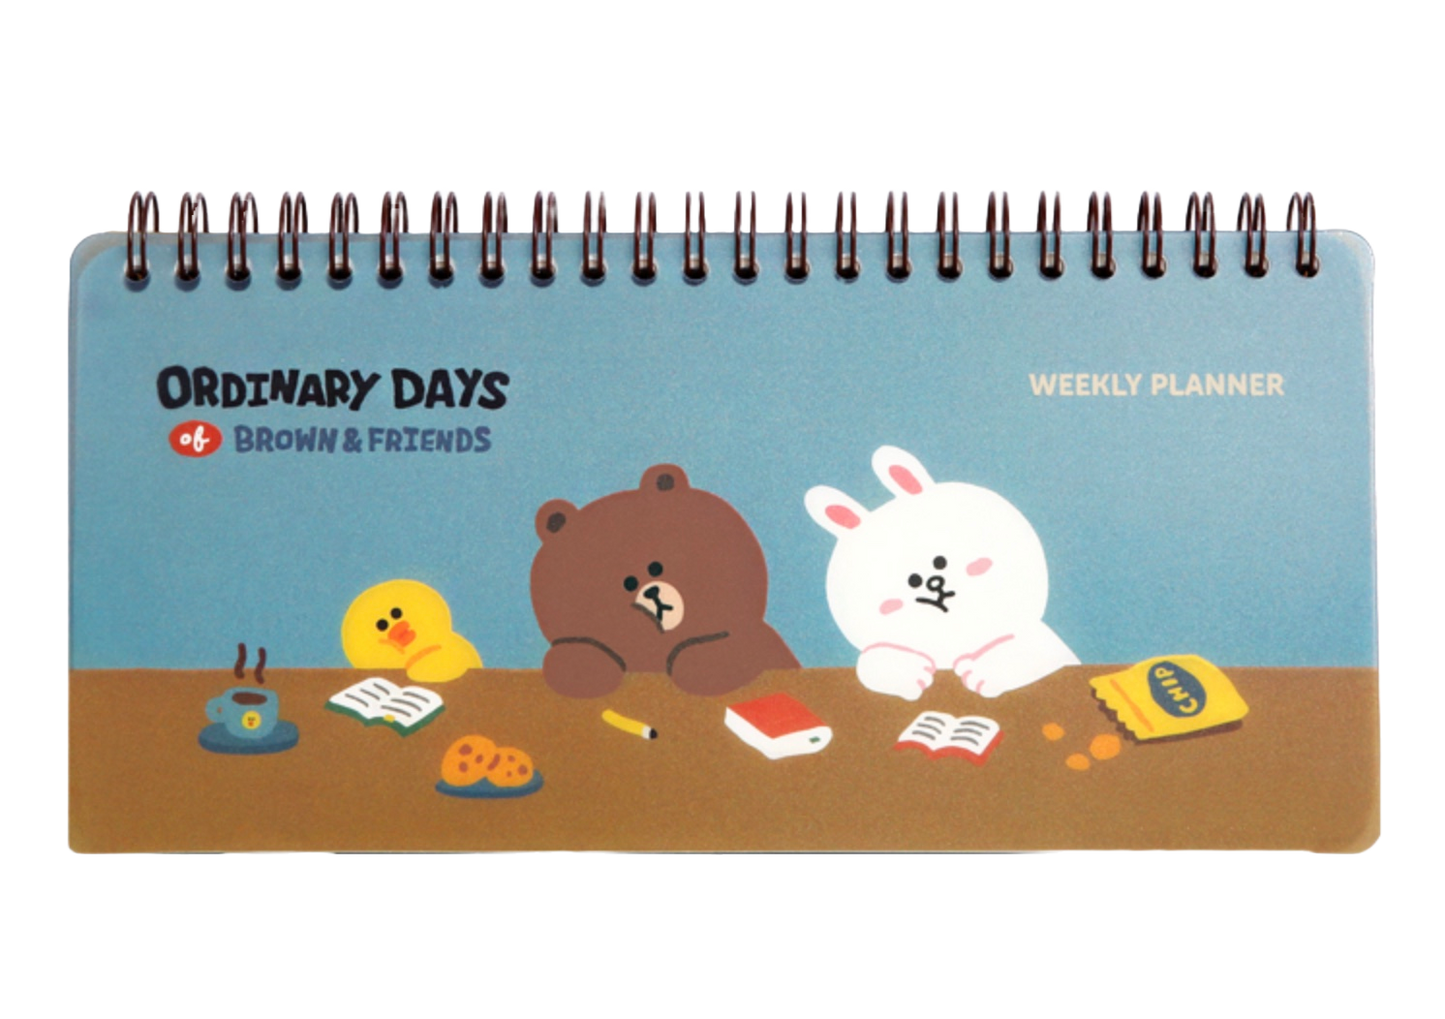 Brown & Friends Weekly Planner - Ordinary Days